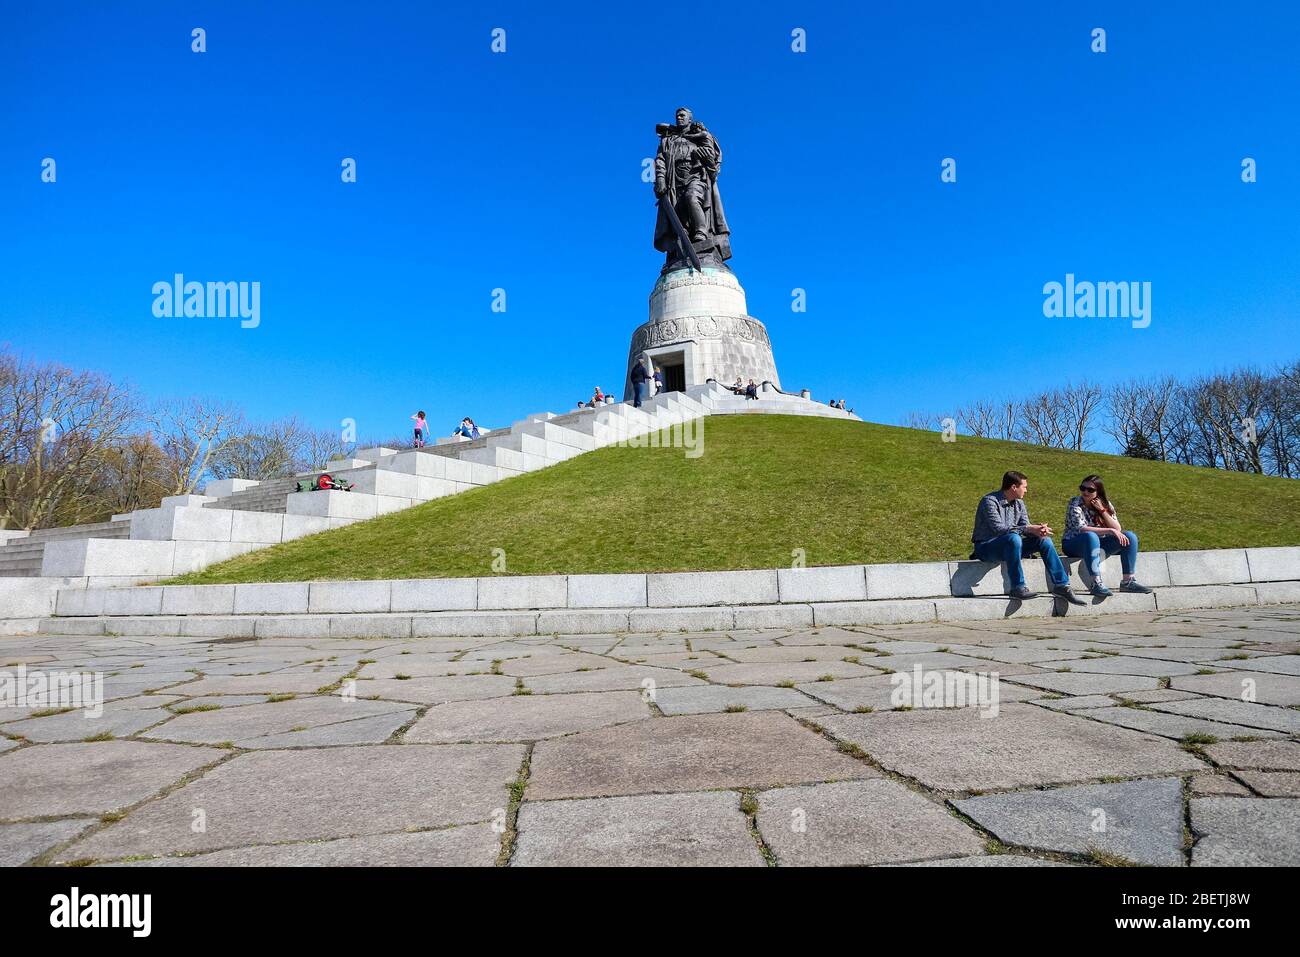 Visitors at the Soviet War Memorial by sculptor Yevgeny Vuchetich in Treptower Park in Treptow, Berlin during coronavirus shutdown in Germany. Stock Photo